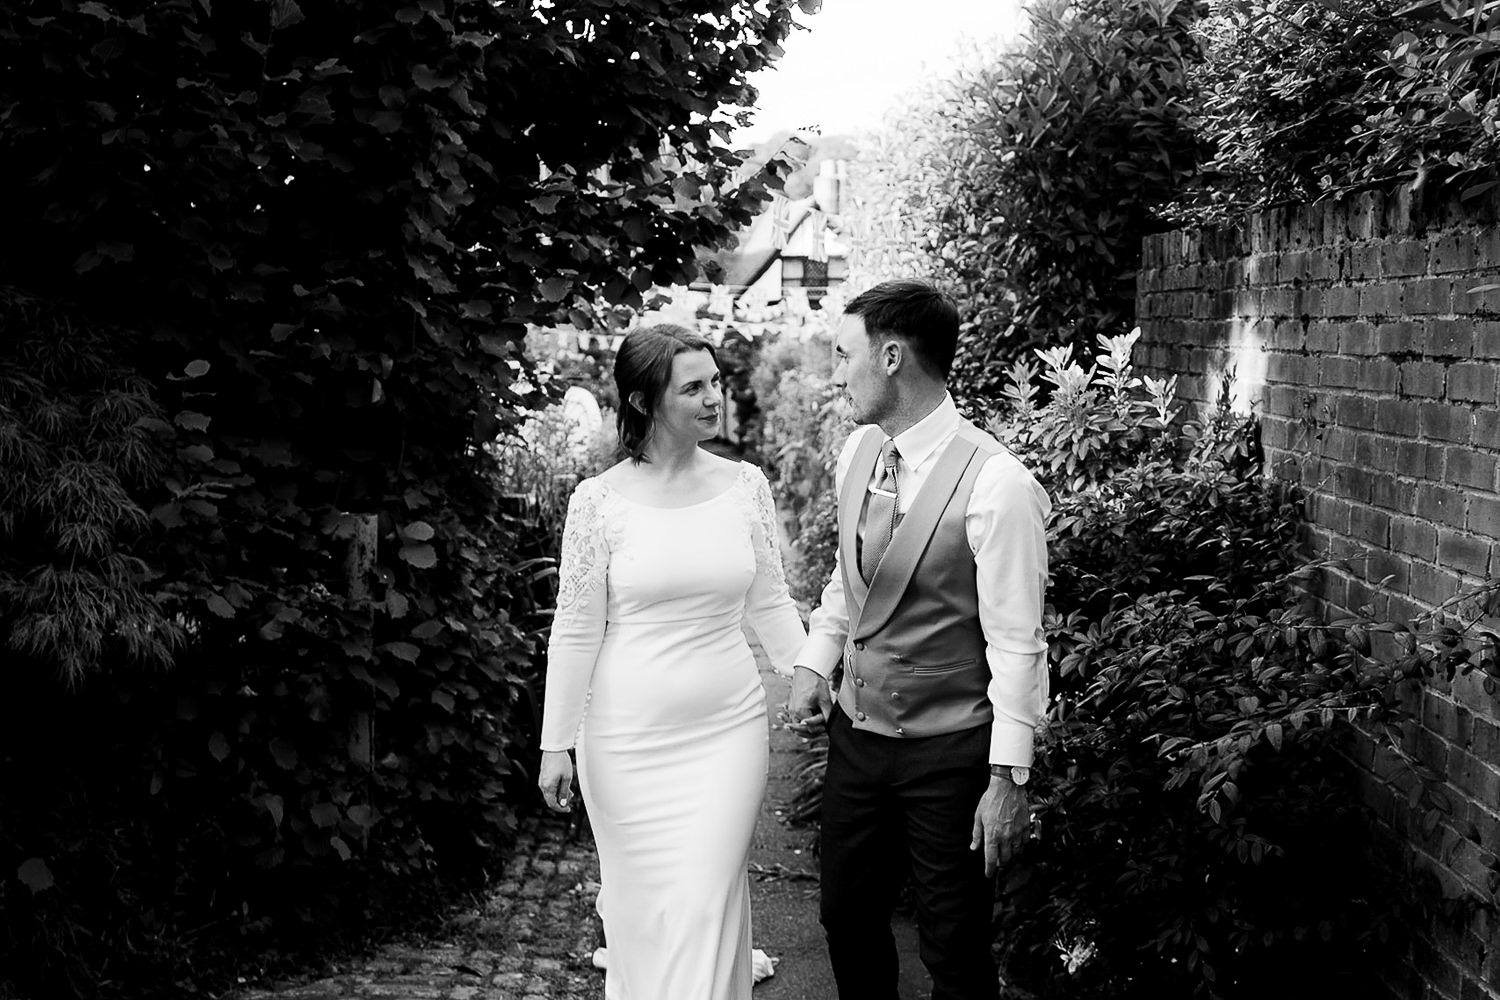 Oxfordshire and the cotswolds wedding photographer 2022 review102.jpg